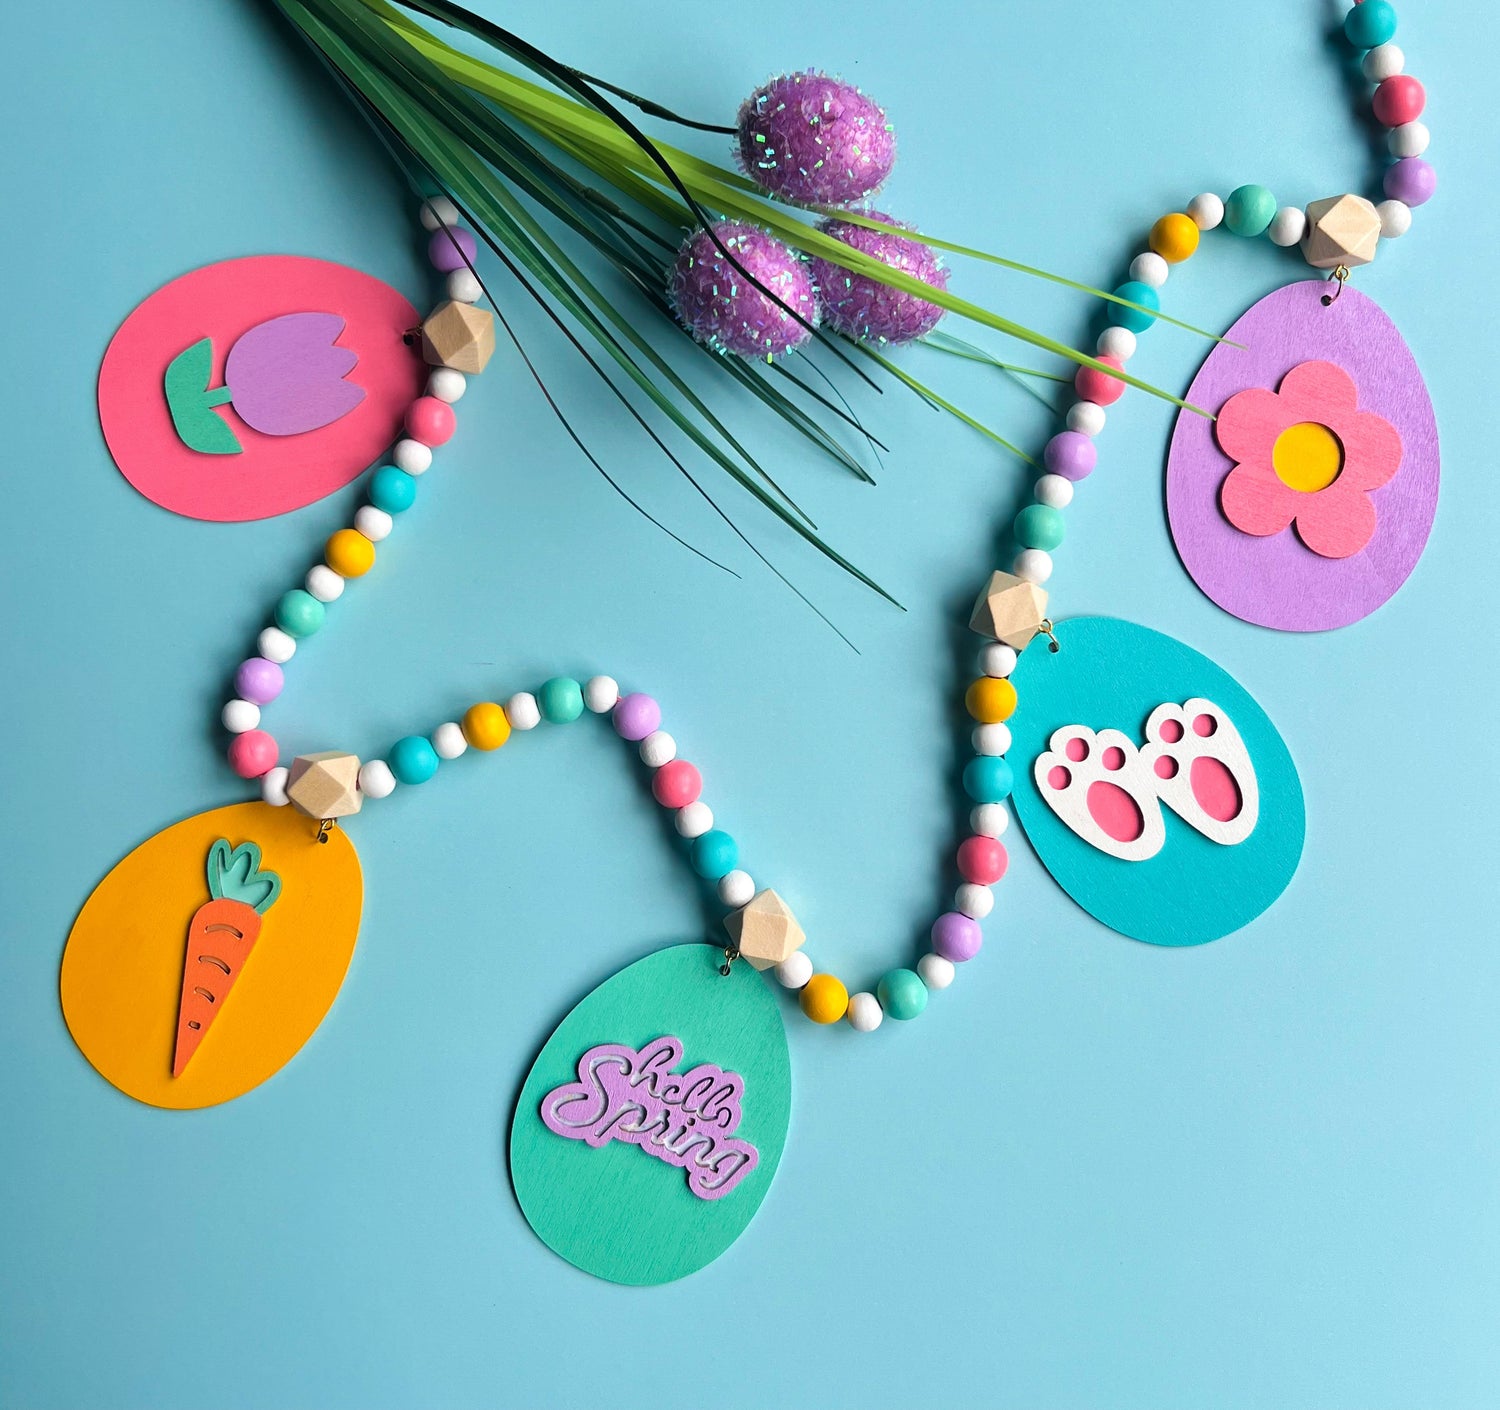 Image of garden themed wood bead garland with flowers, a bird house, a bird, butterfly, and watering can. These elements hang from painted wood beads.